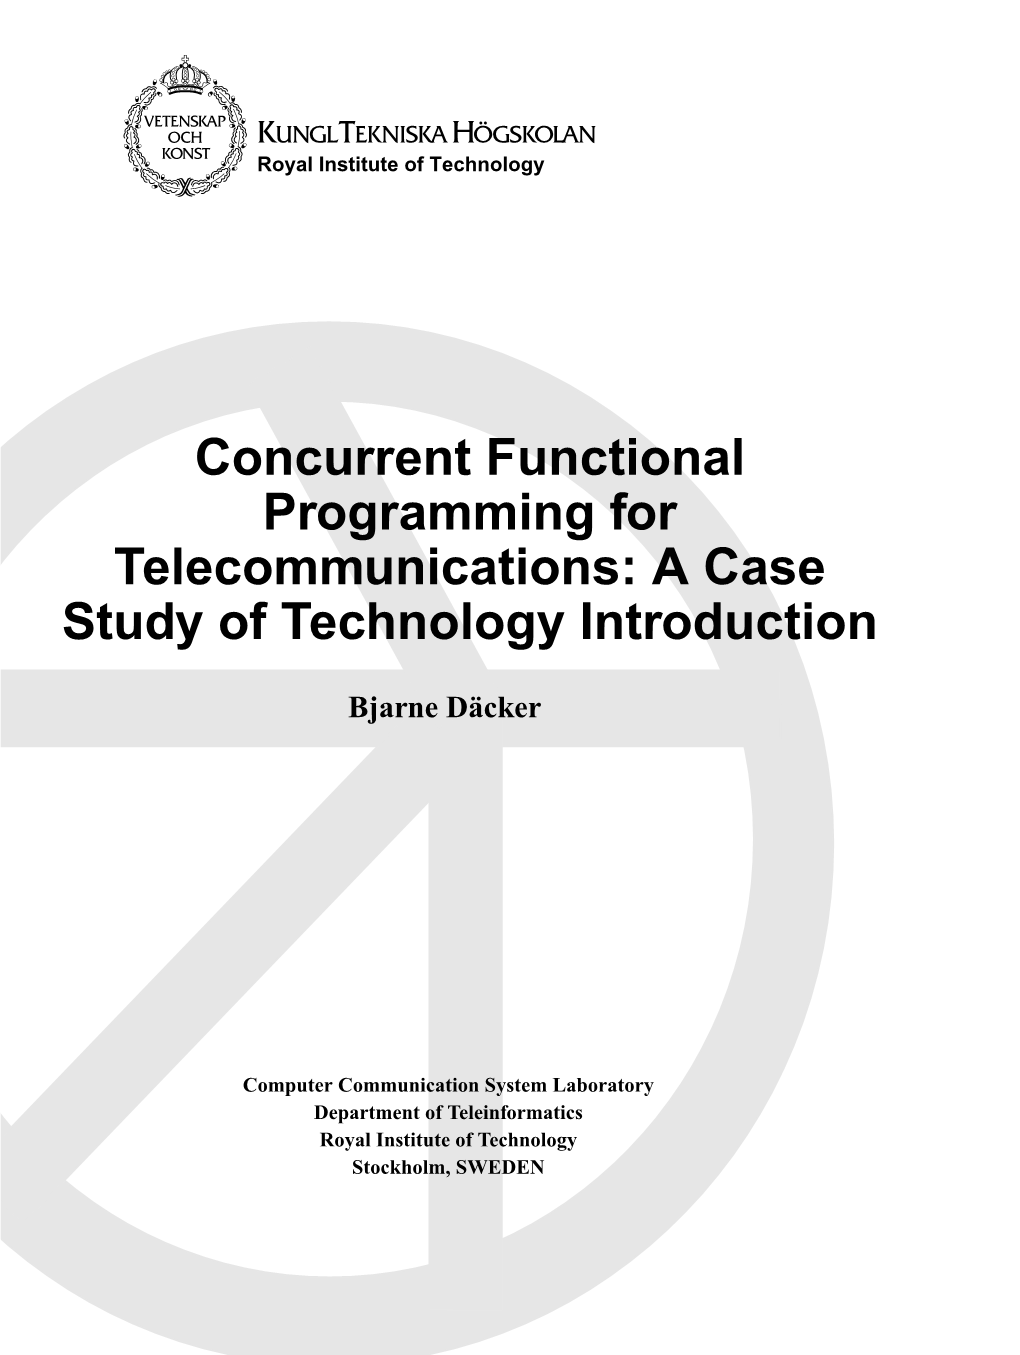 Concurrent Functional Programming for Telecommunications: a Case Study of Technology Introduction